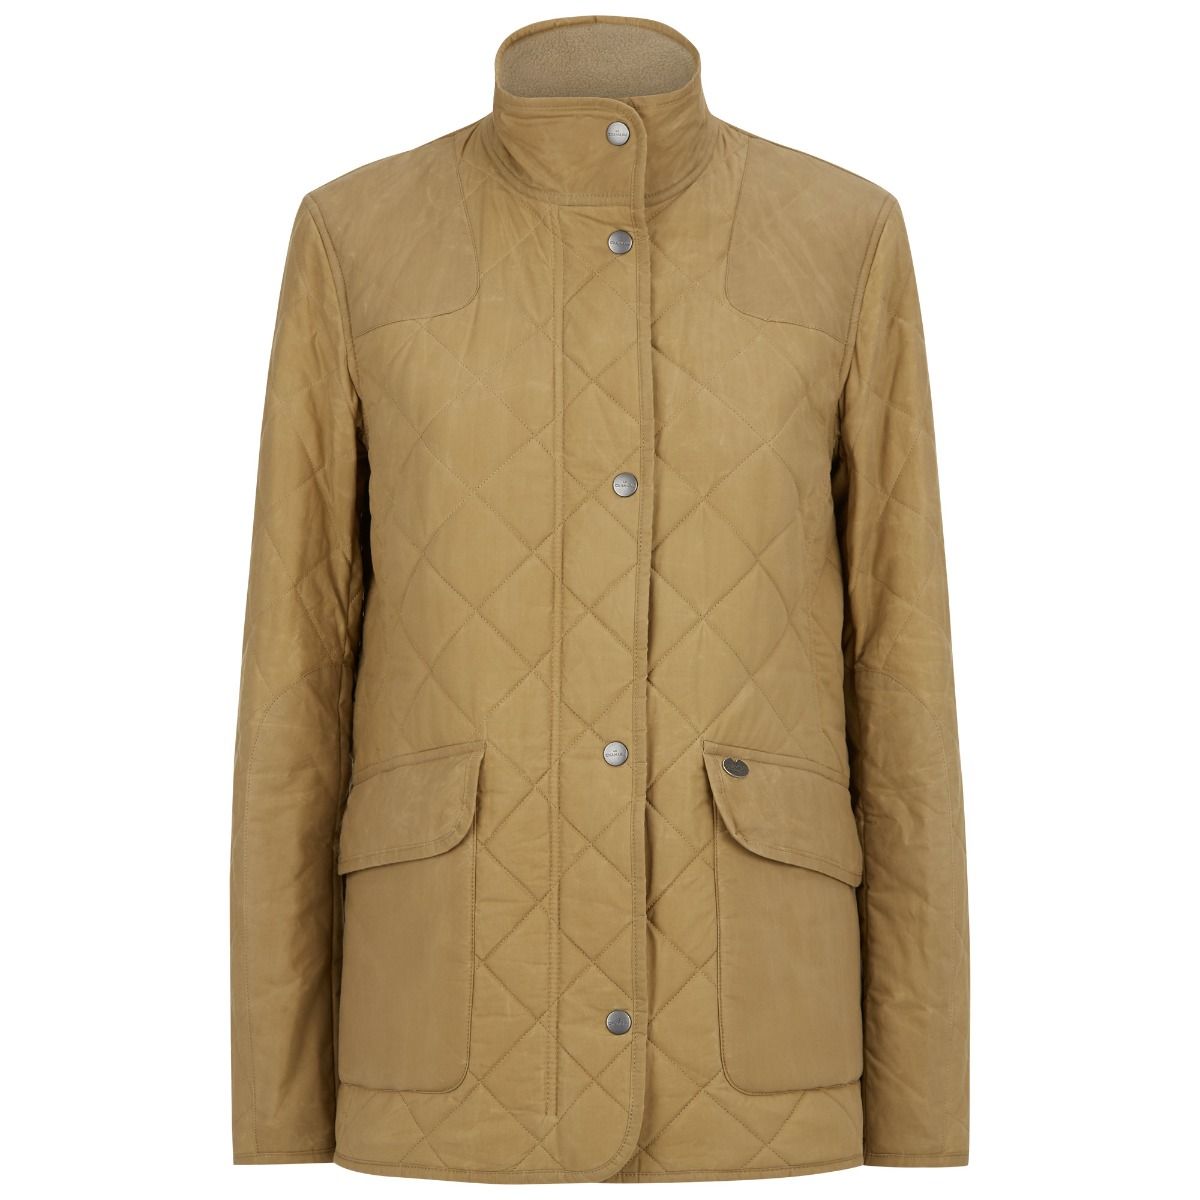 Le Chameau LCW12 Quilted Country Jacket